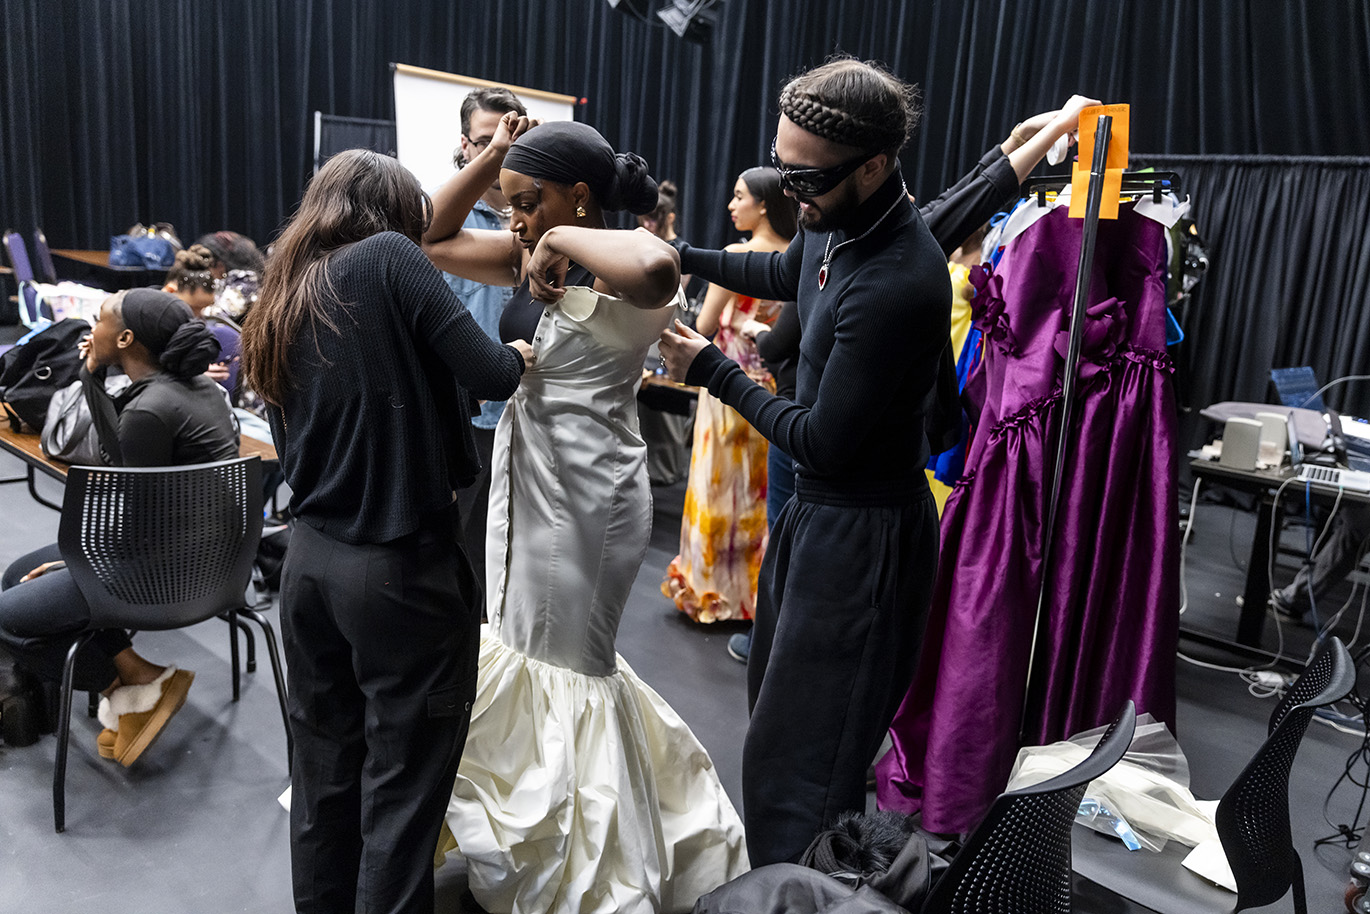 Model gets support from two people putting on dress in backroom to get ready for fashion show.